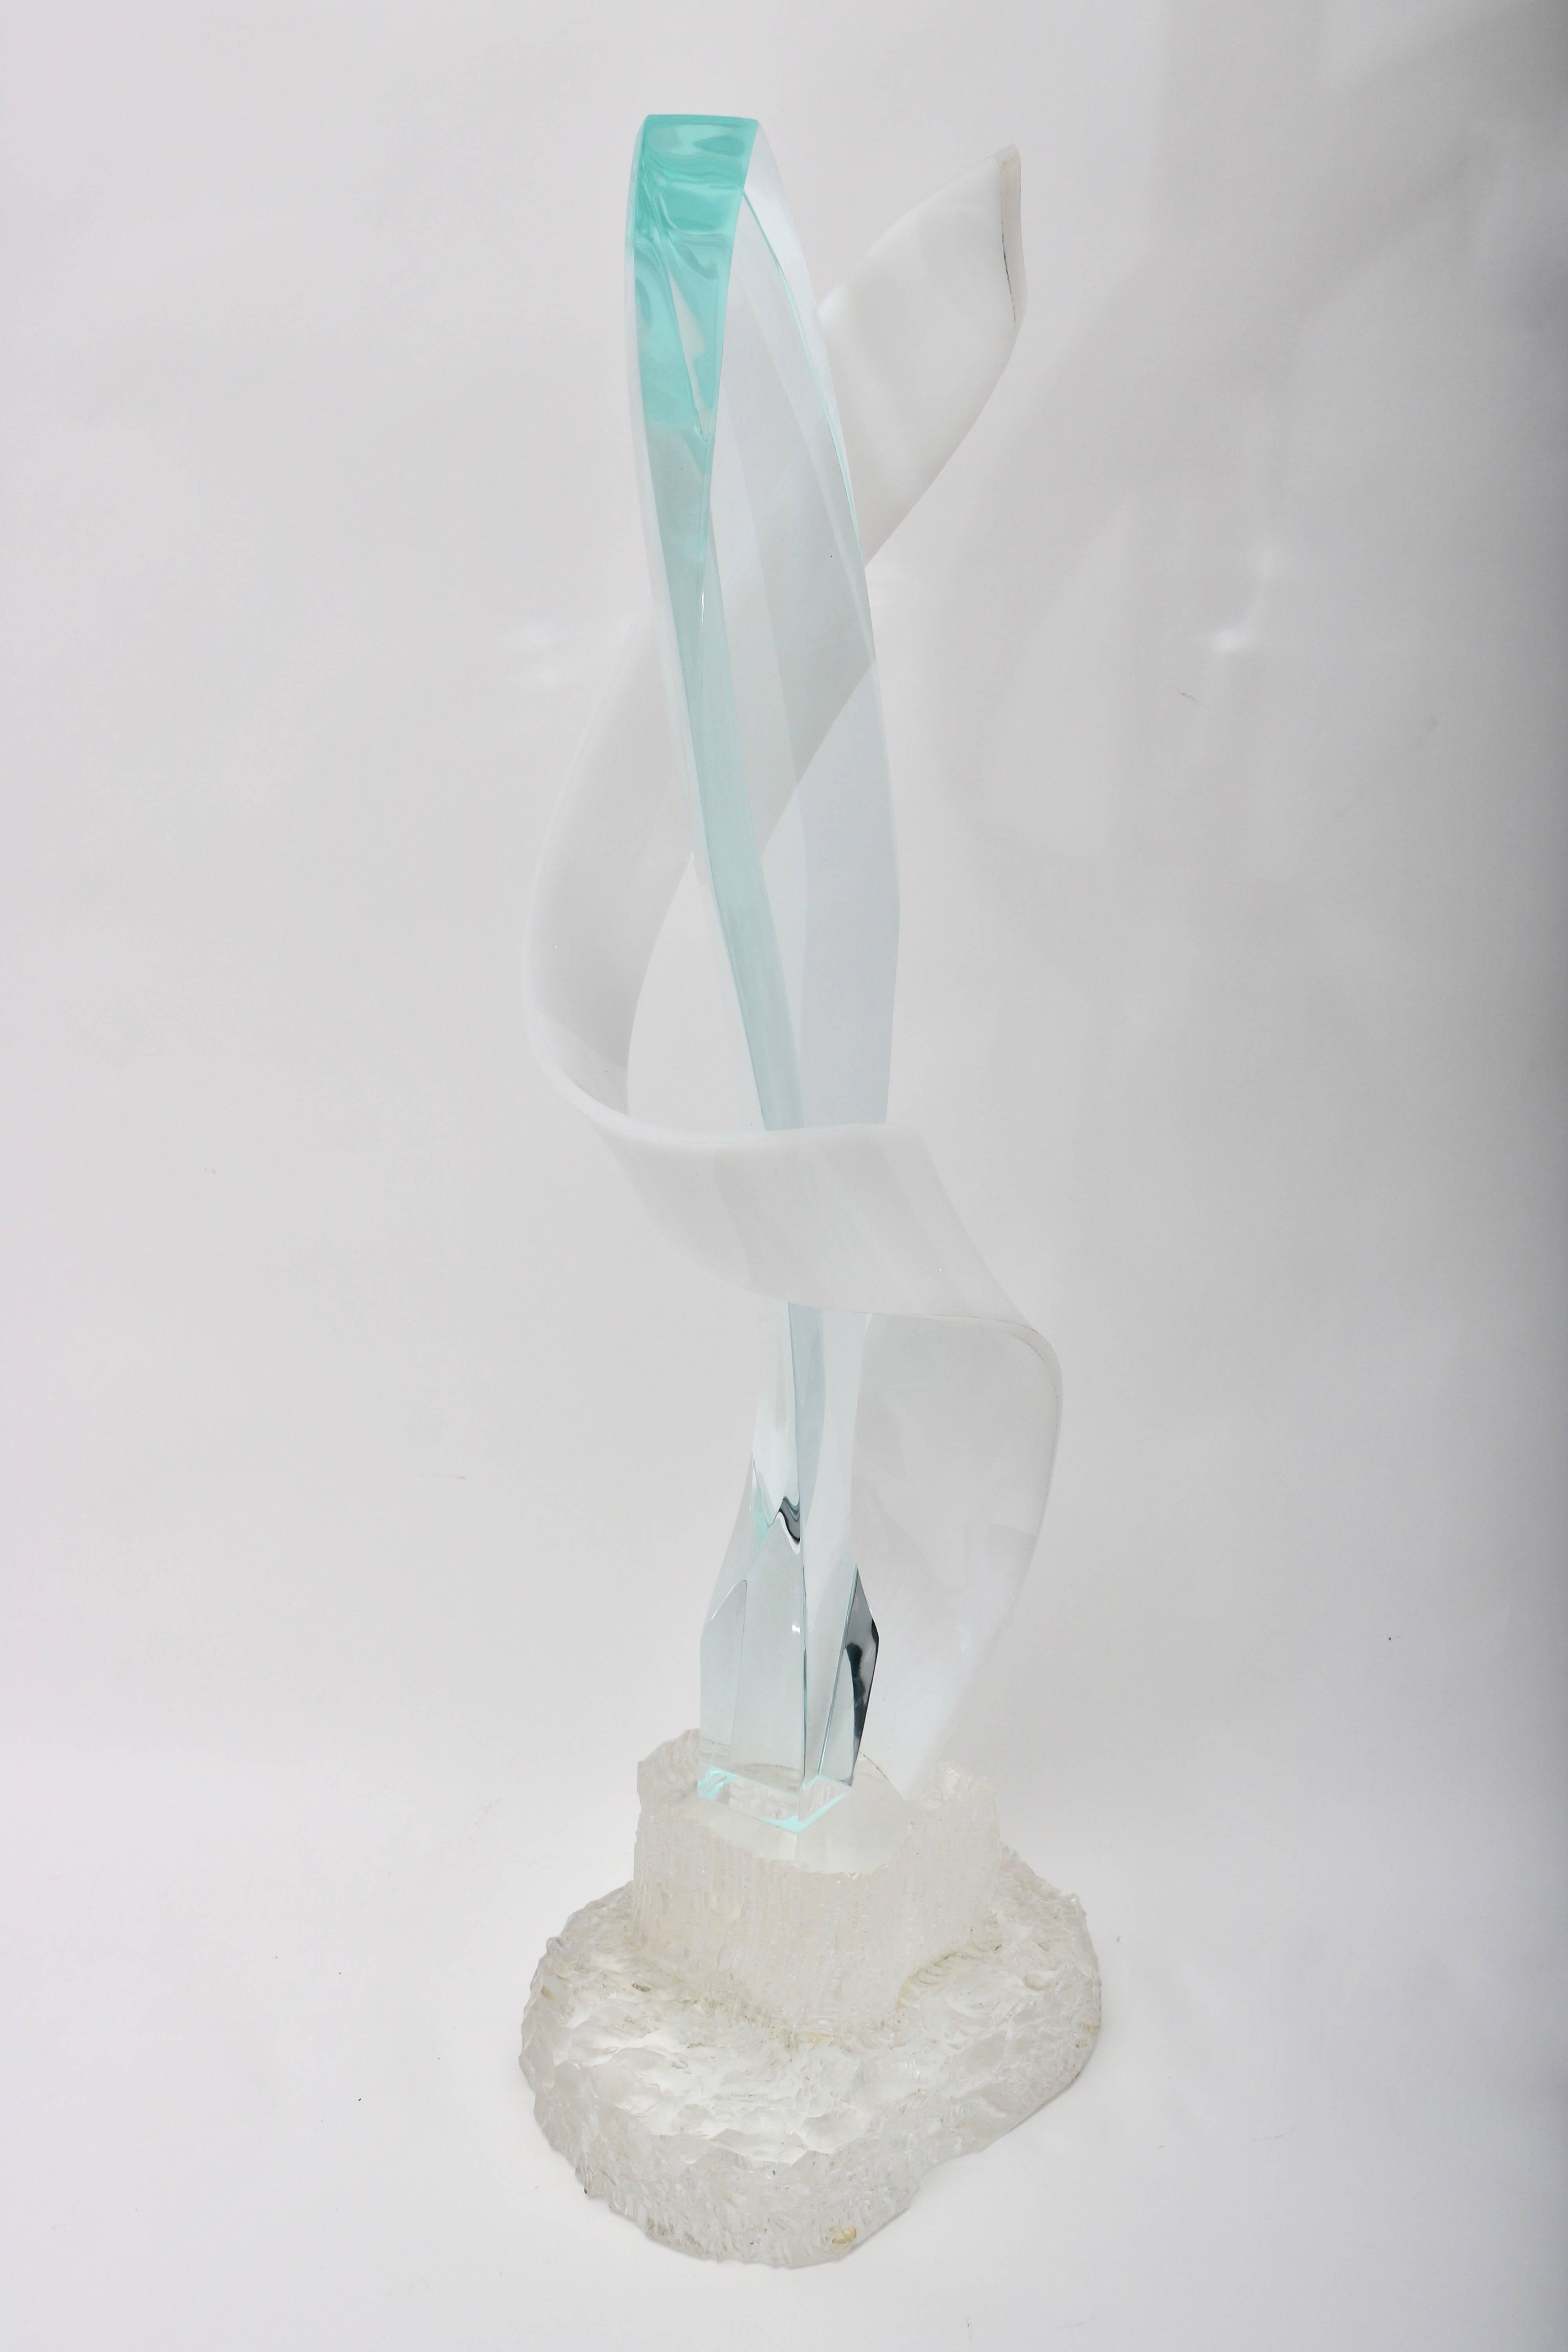 20th Century Van Teal Style Ribbon-Form Lucite Sculpture, Clear, White and Turquoise Green